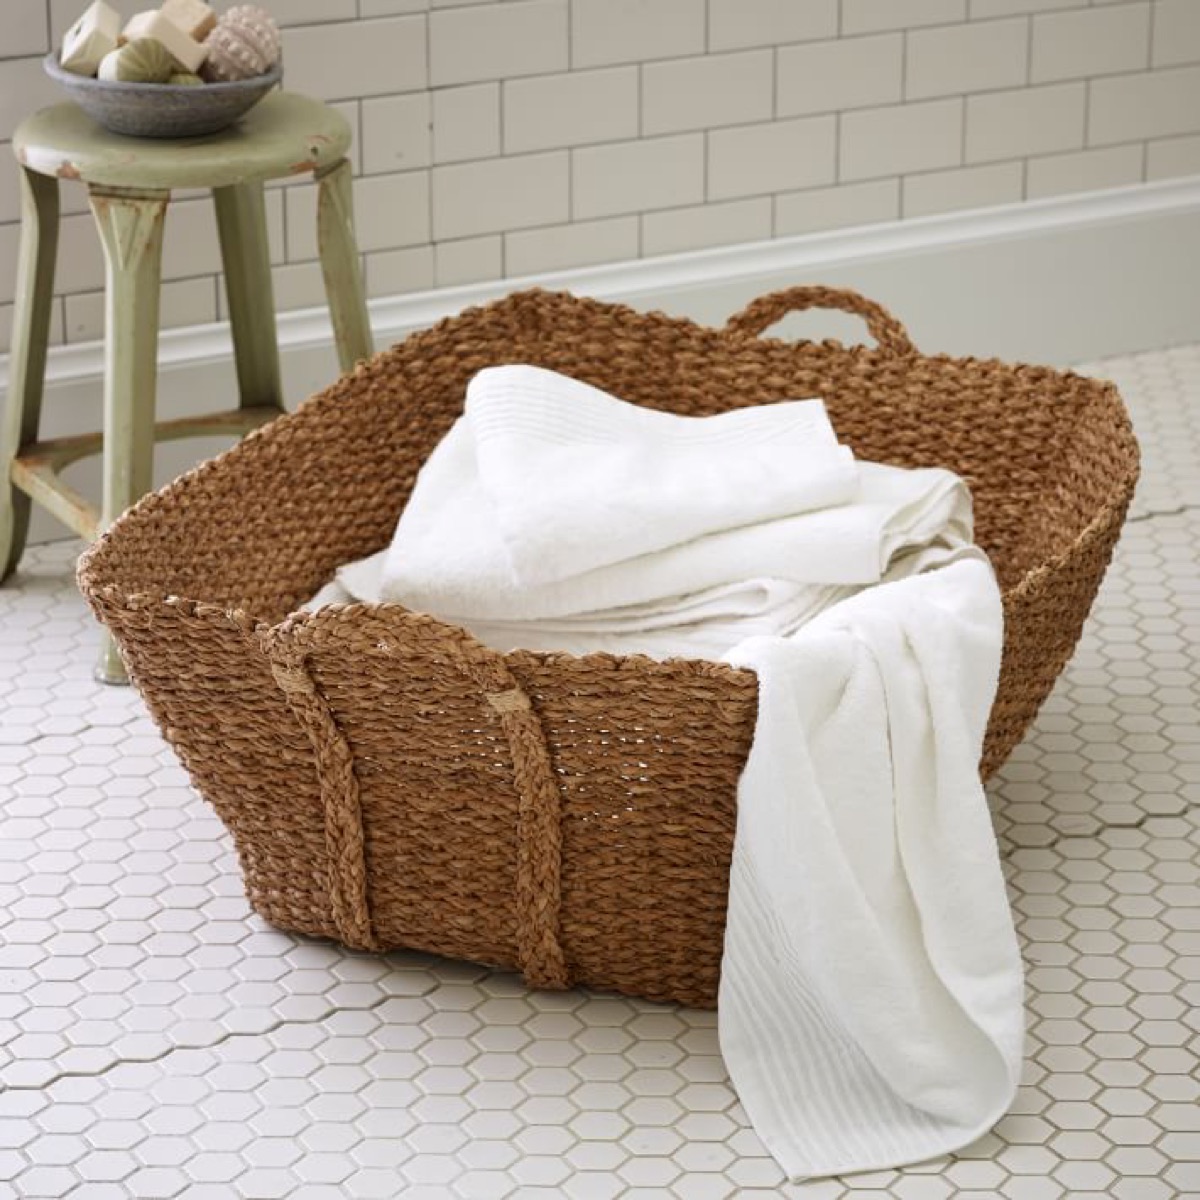 french laundry basket cheap home upgrades